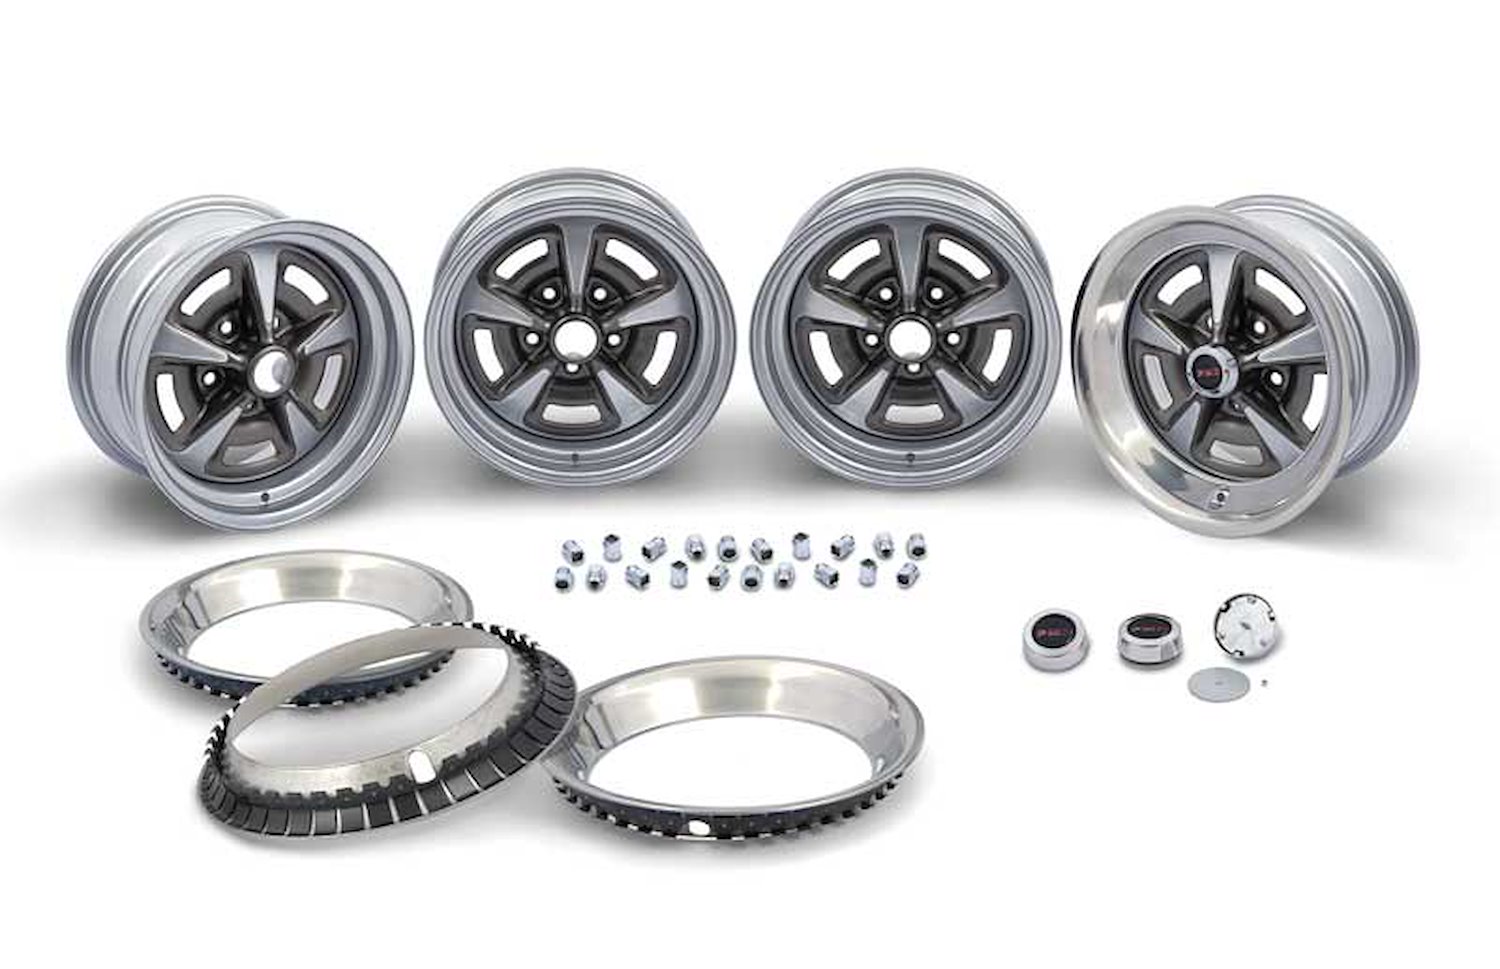 RDK403B Rally II Wheel Kit With Black Center Caps 15" X 7", Complete Set